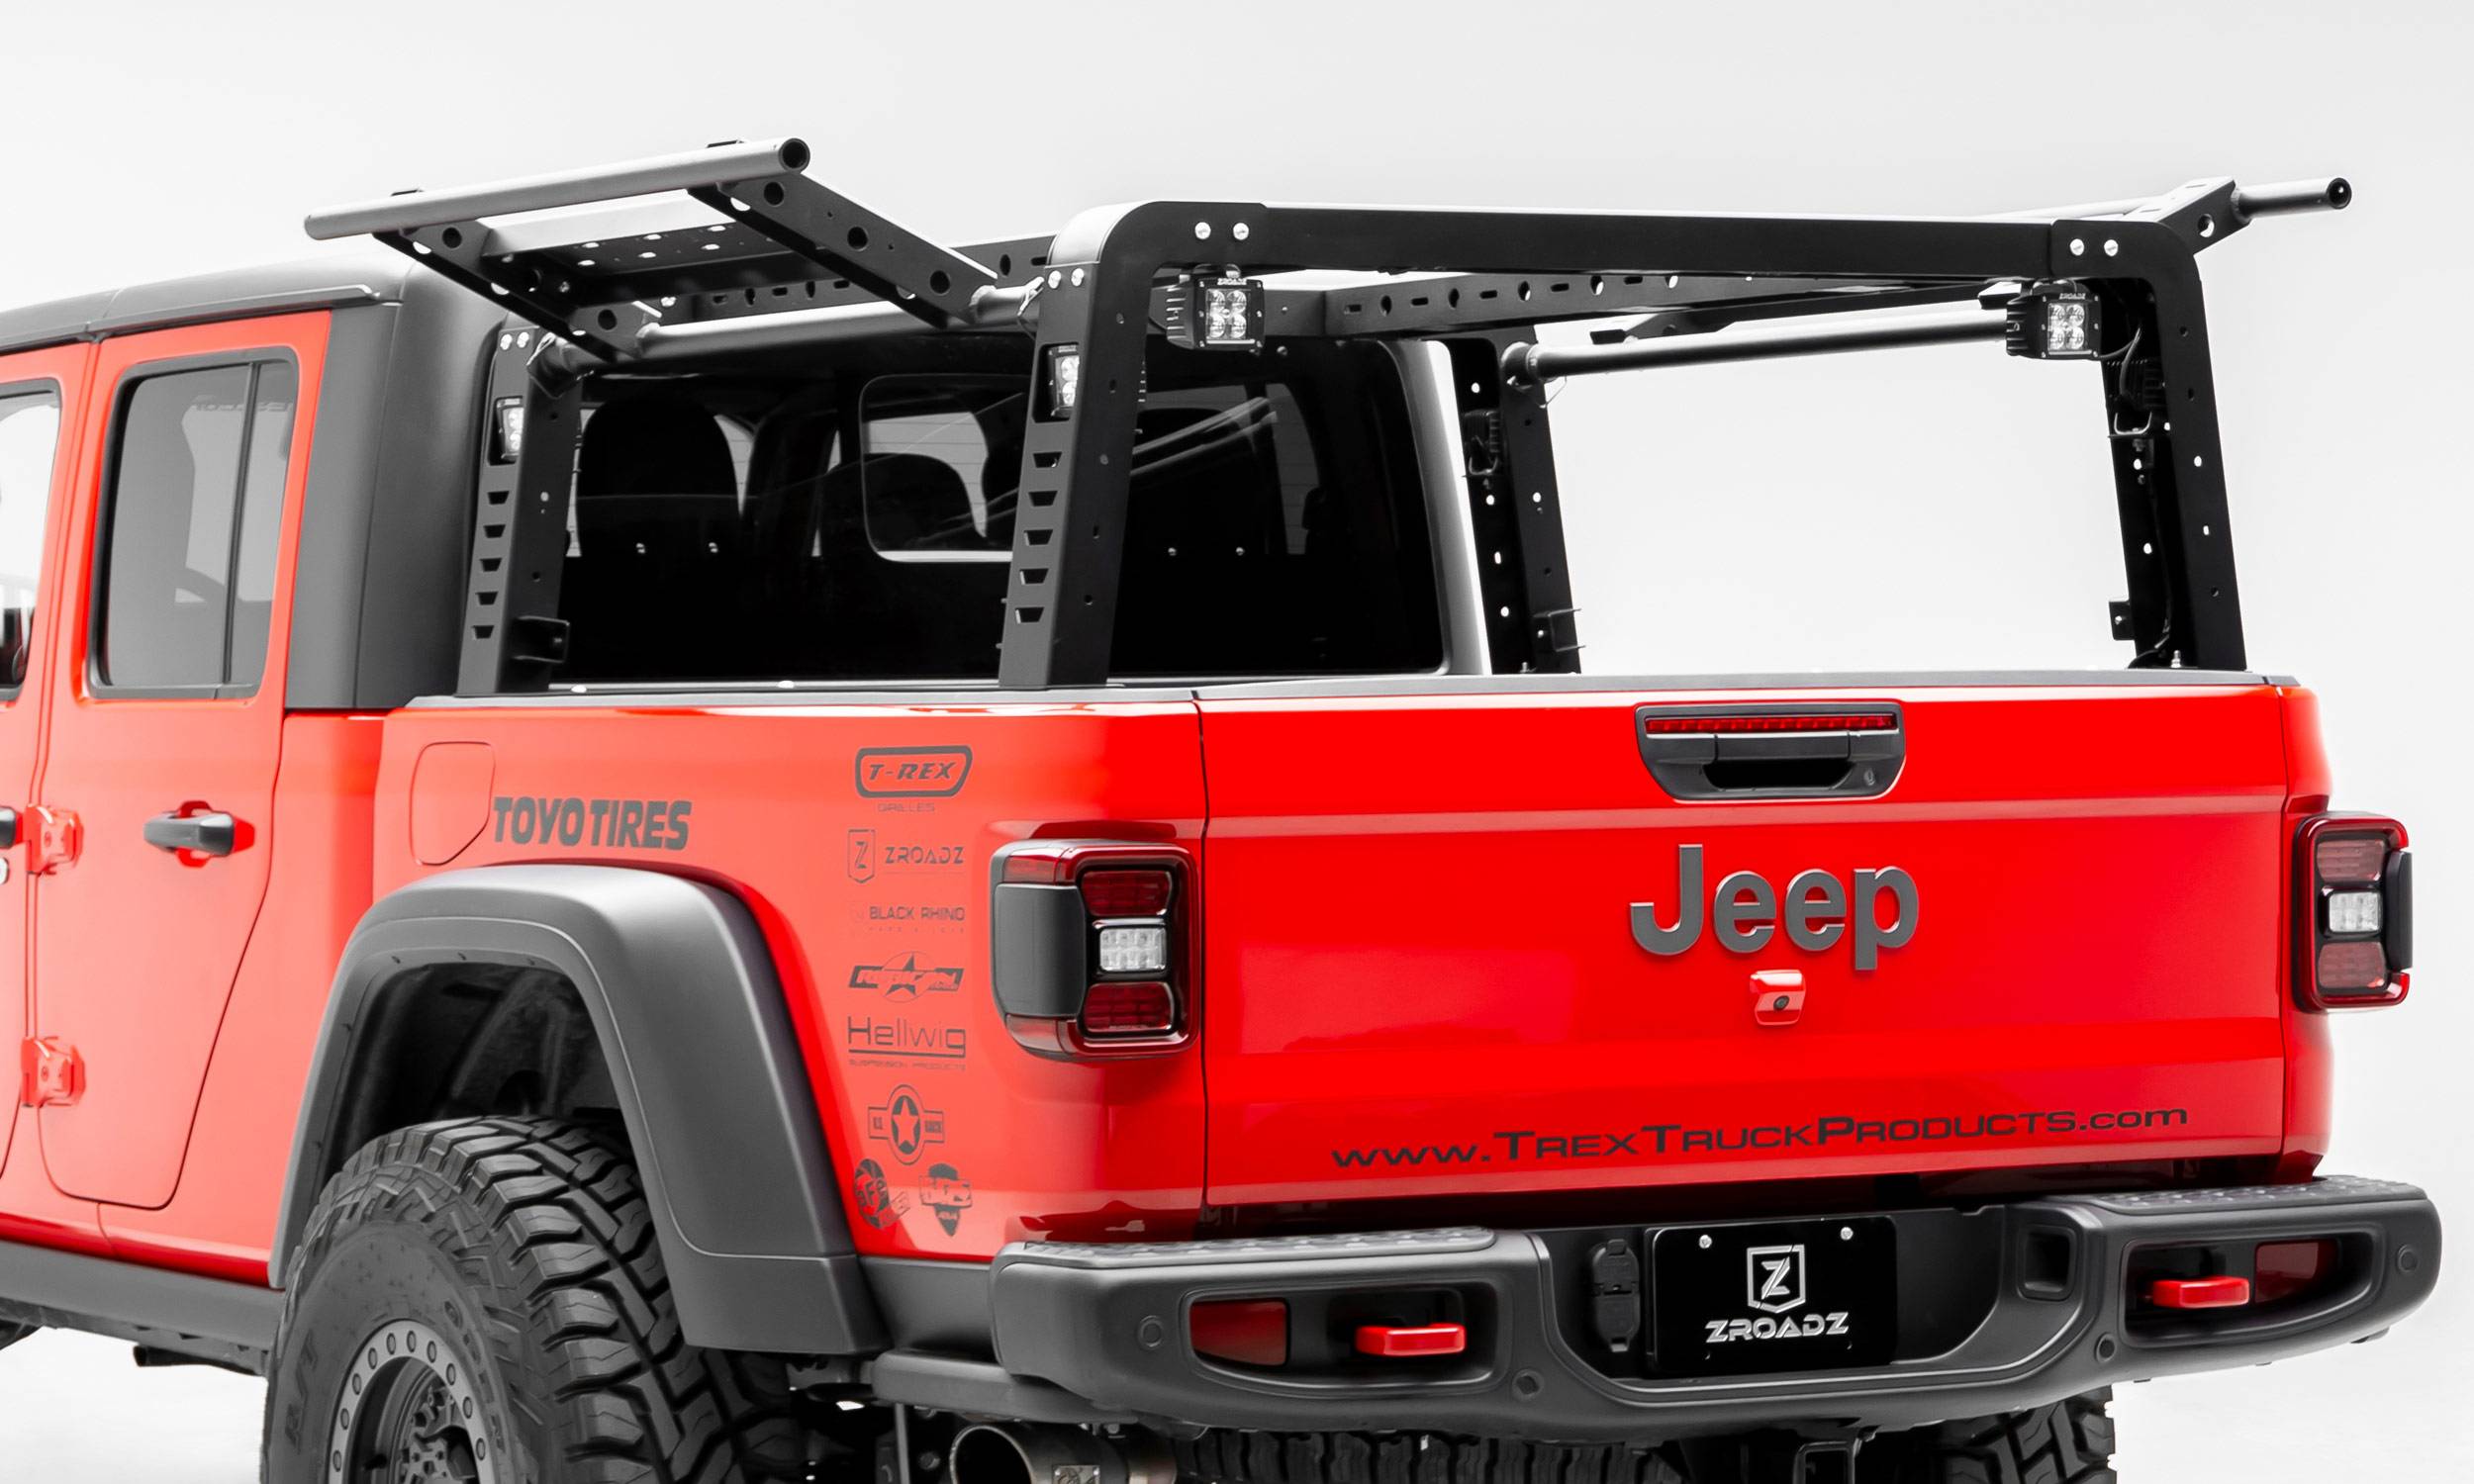 ZROADZ OFF ROAD PRODUCTS - 2019-2023 Jeep Gladiator Access Overland Rack With Two Lifting Side Gates, For use on vehicles equipped with Factory TRAIL RAIL CARGO TRACK Systems - Part # Z834111